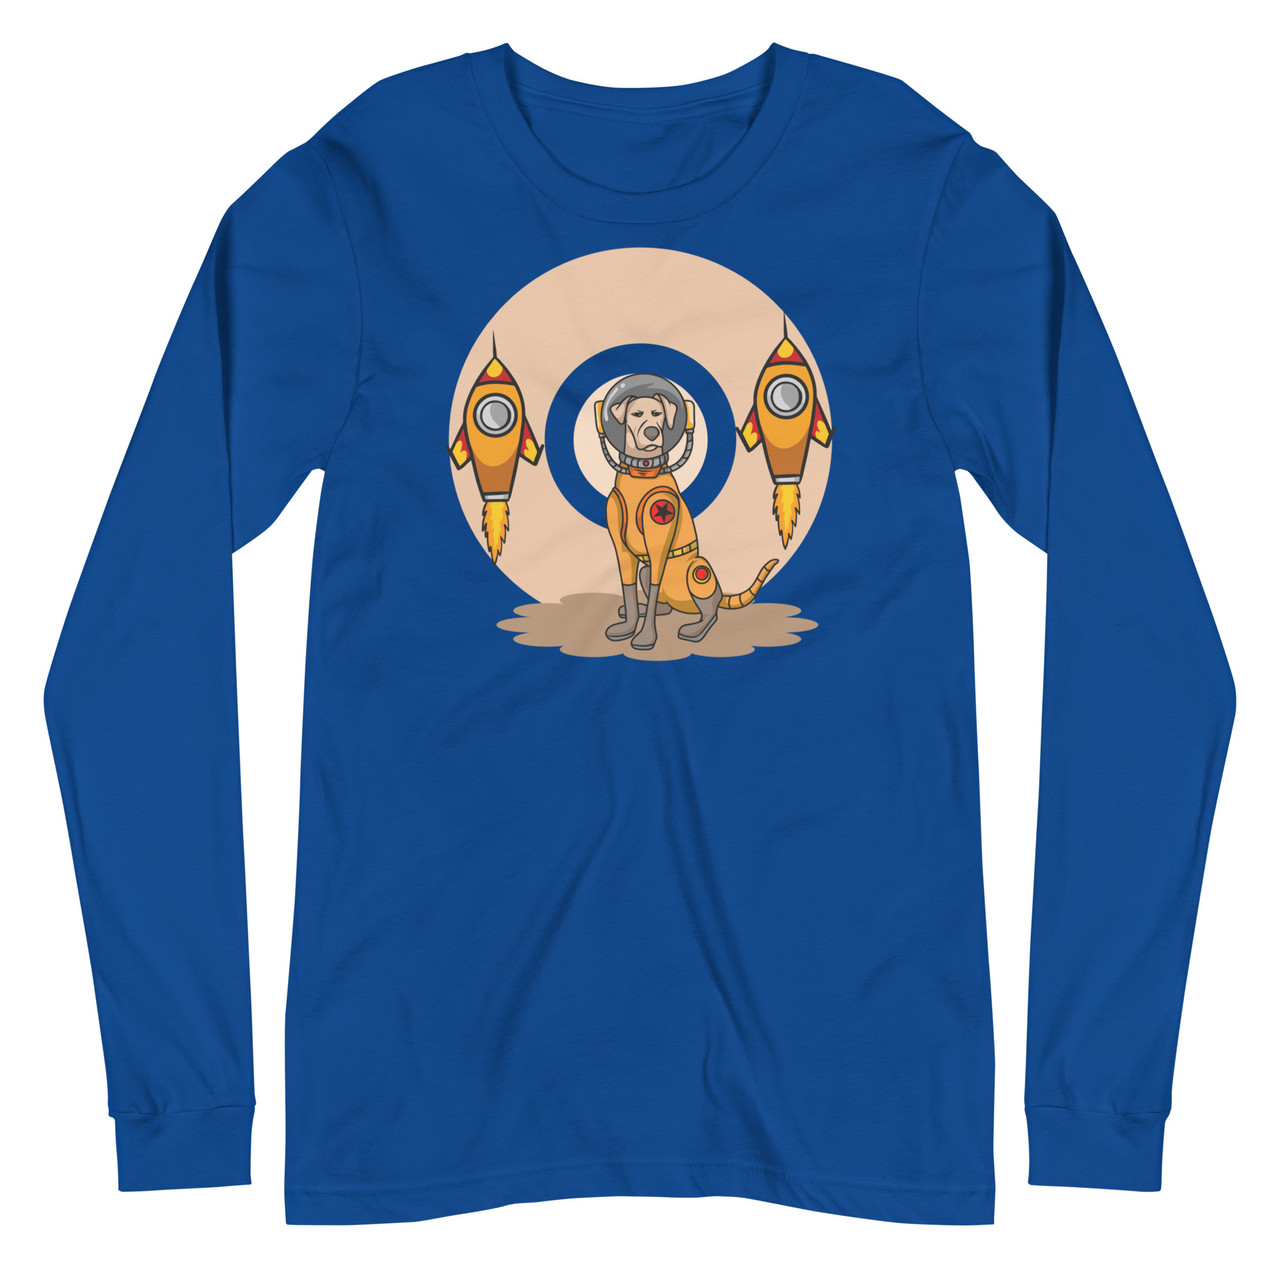 Dog on a Mission Unisex Long Sleeve Tee - Bella + Canvas 3501